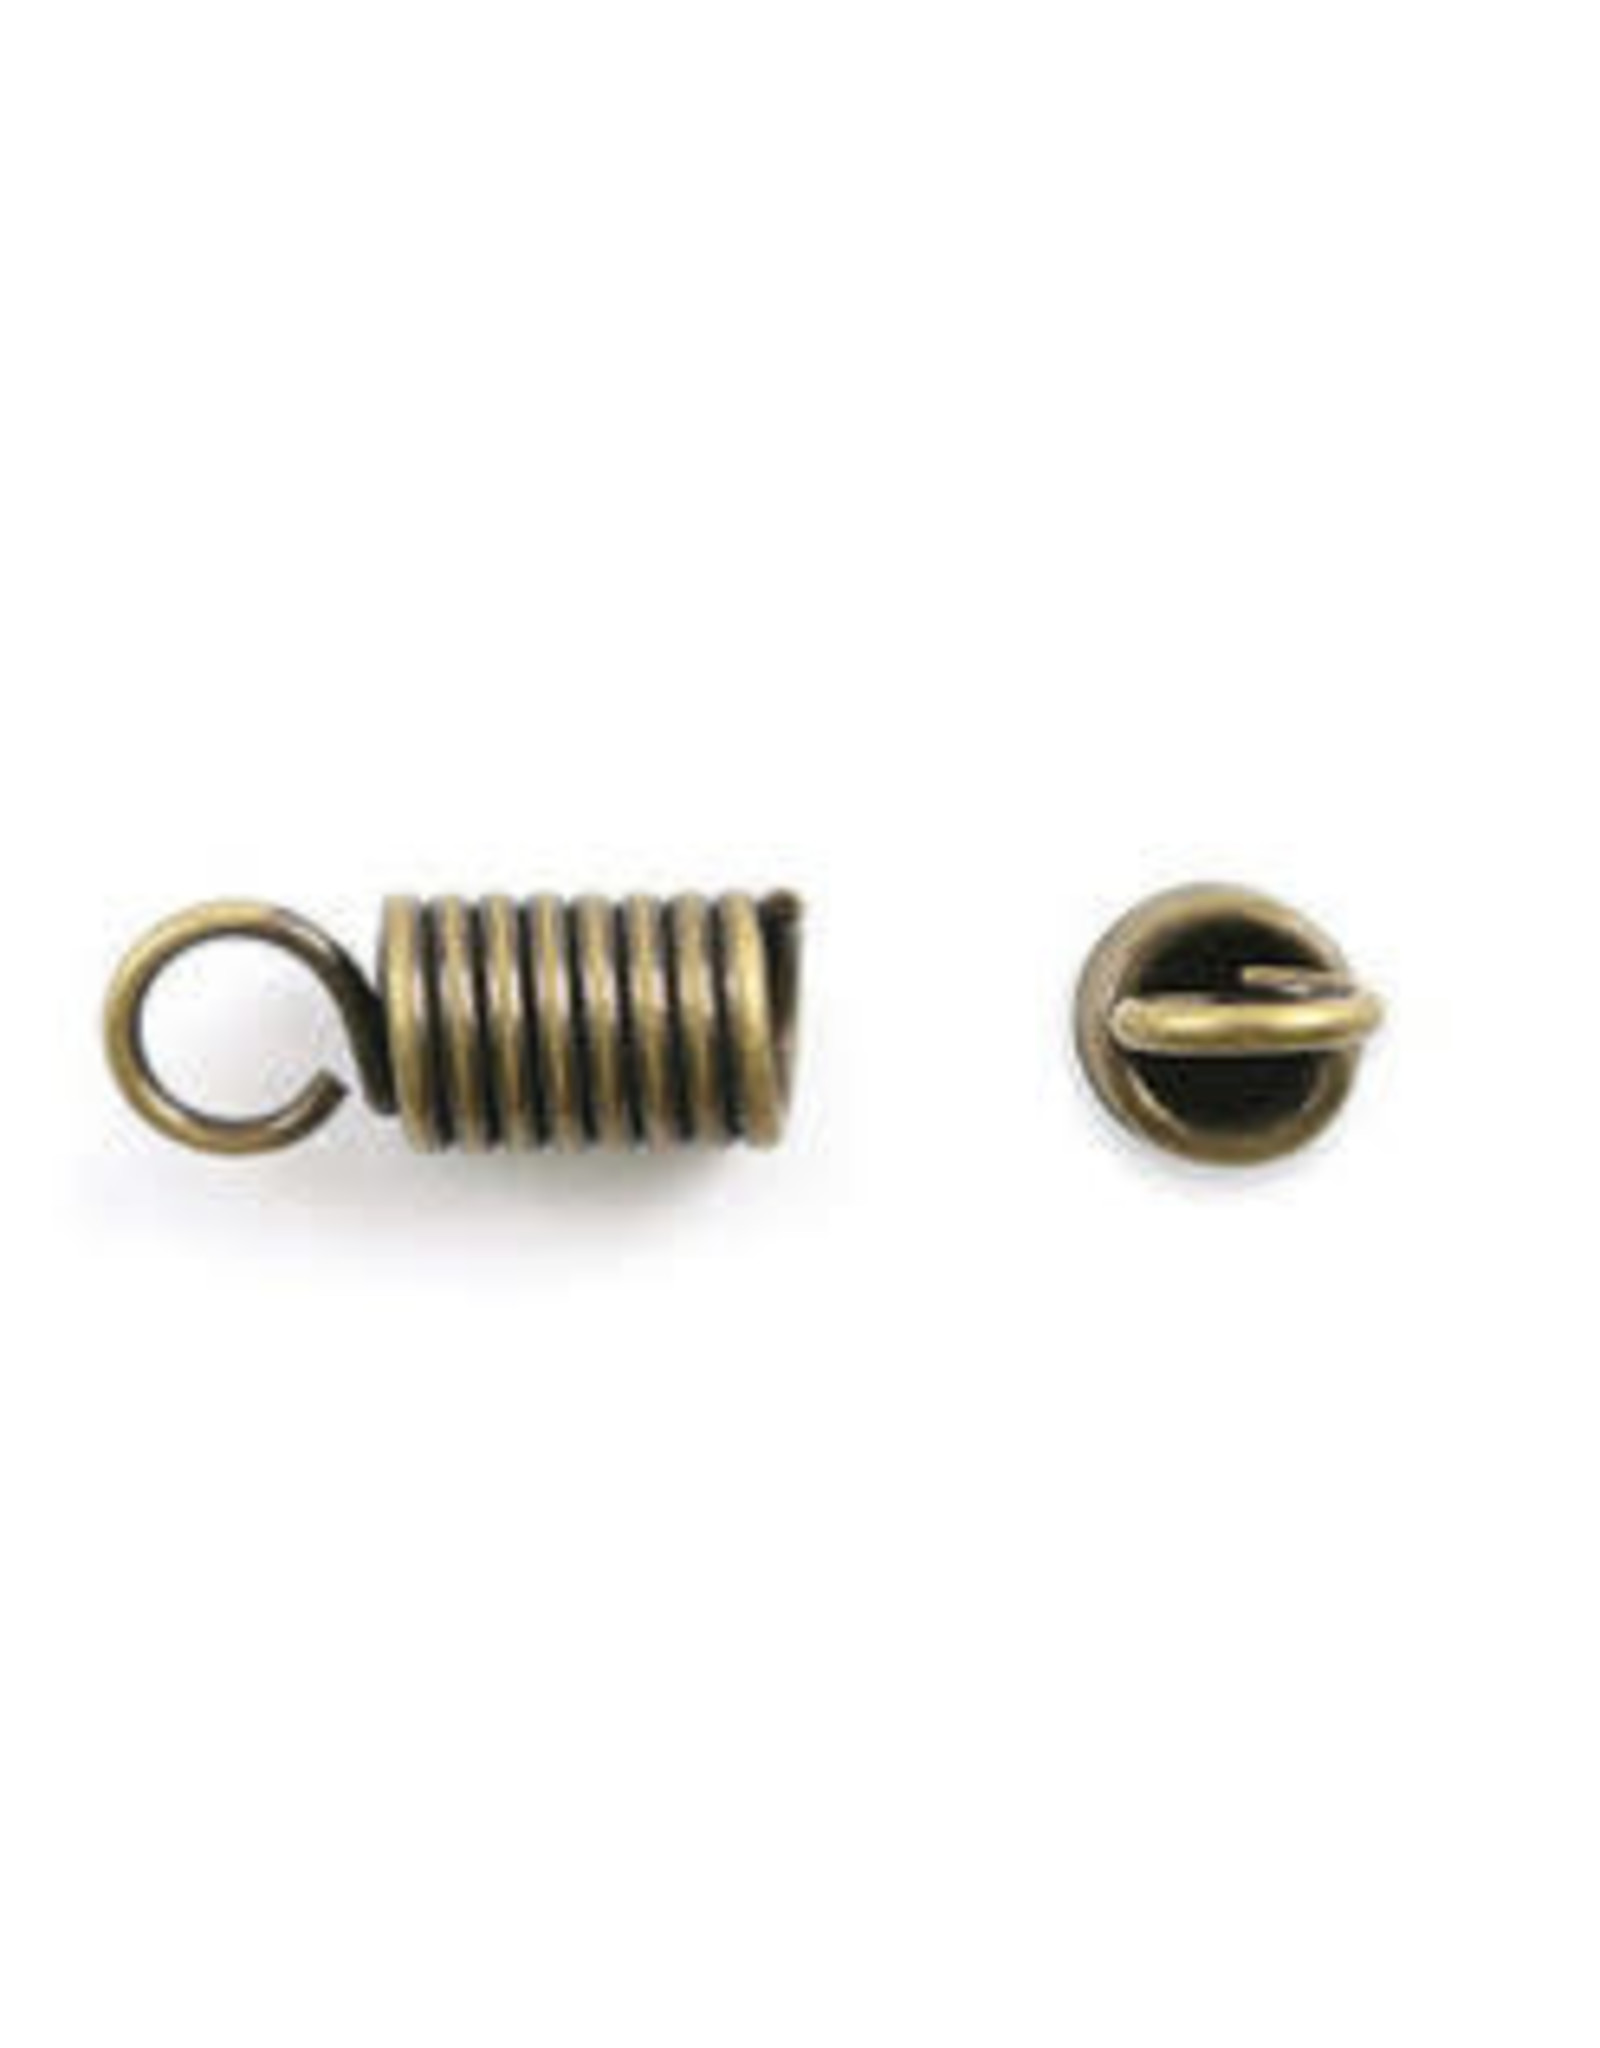 Coil End Crimp Antique Brass for 2mm cord  x50 NF